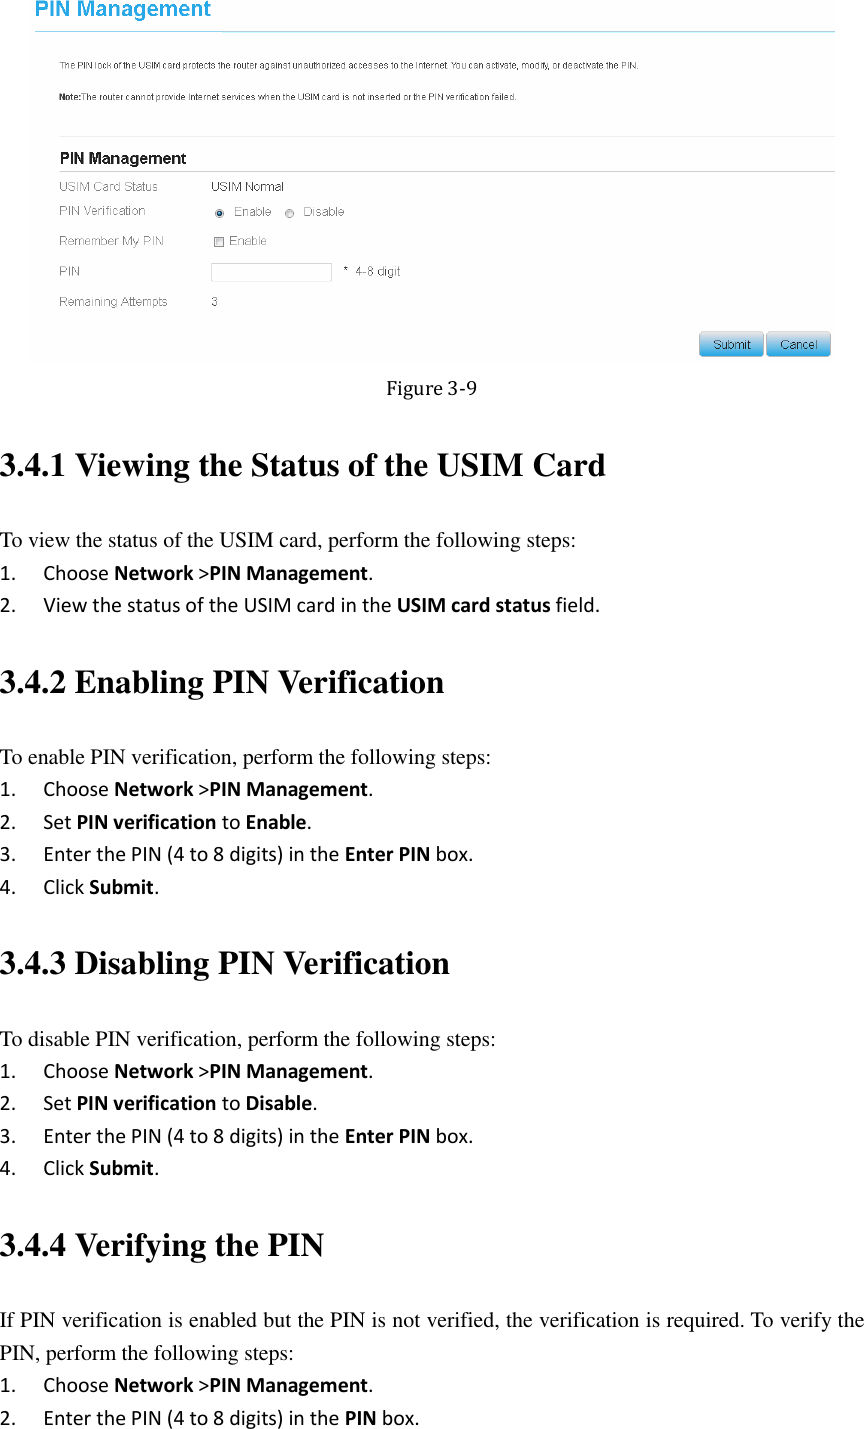    Figure 3-9 3.4.1 Viewing the Status of the USIM Card To view the status of the USIM card, perform the following steps: 1. Choose Network &gt;PIN Management. 2. View the status of the USIM card in the USIM card status field. 3.4.2 Enabling PIN Verification To enable PIN verification, perform the following steps: 1. Choose Network &gt;PIN Management. 2. Set PIN verification to Enable. 3. Enter the PIN (4 to 8 digits) in the Enter PIN box. 4. Click Submit. 3.4.3 Disabling PIN Verification To disable PIN verification, perform the following steps: 1. Choose Network &gt;PIN Management. 2. Set PIN verification to Disable. 3. Enter the PIN (4 to 8 digits) in the Enter PIN box. 4. Click Submit. 3.4.4 Verifying the PIN If PIN verification is enabled but the PIN is not verified, the verification is required. To verify the PIN, perform the following steps: 1. Choose Network &gt;PIN Management. 2. Enter the PIN (4 to 8 digits) in the PIN box. 